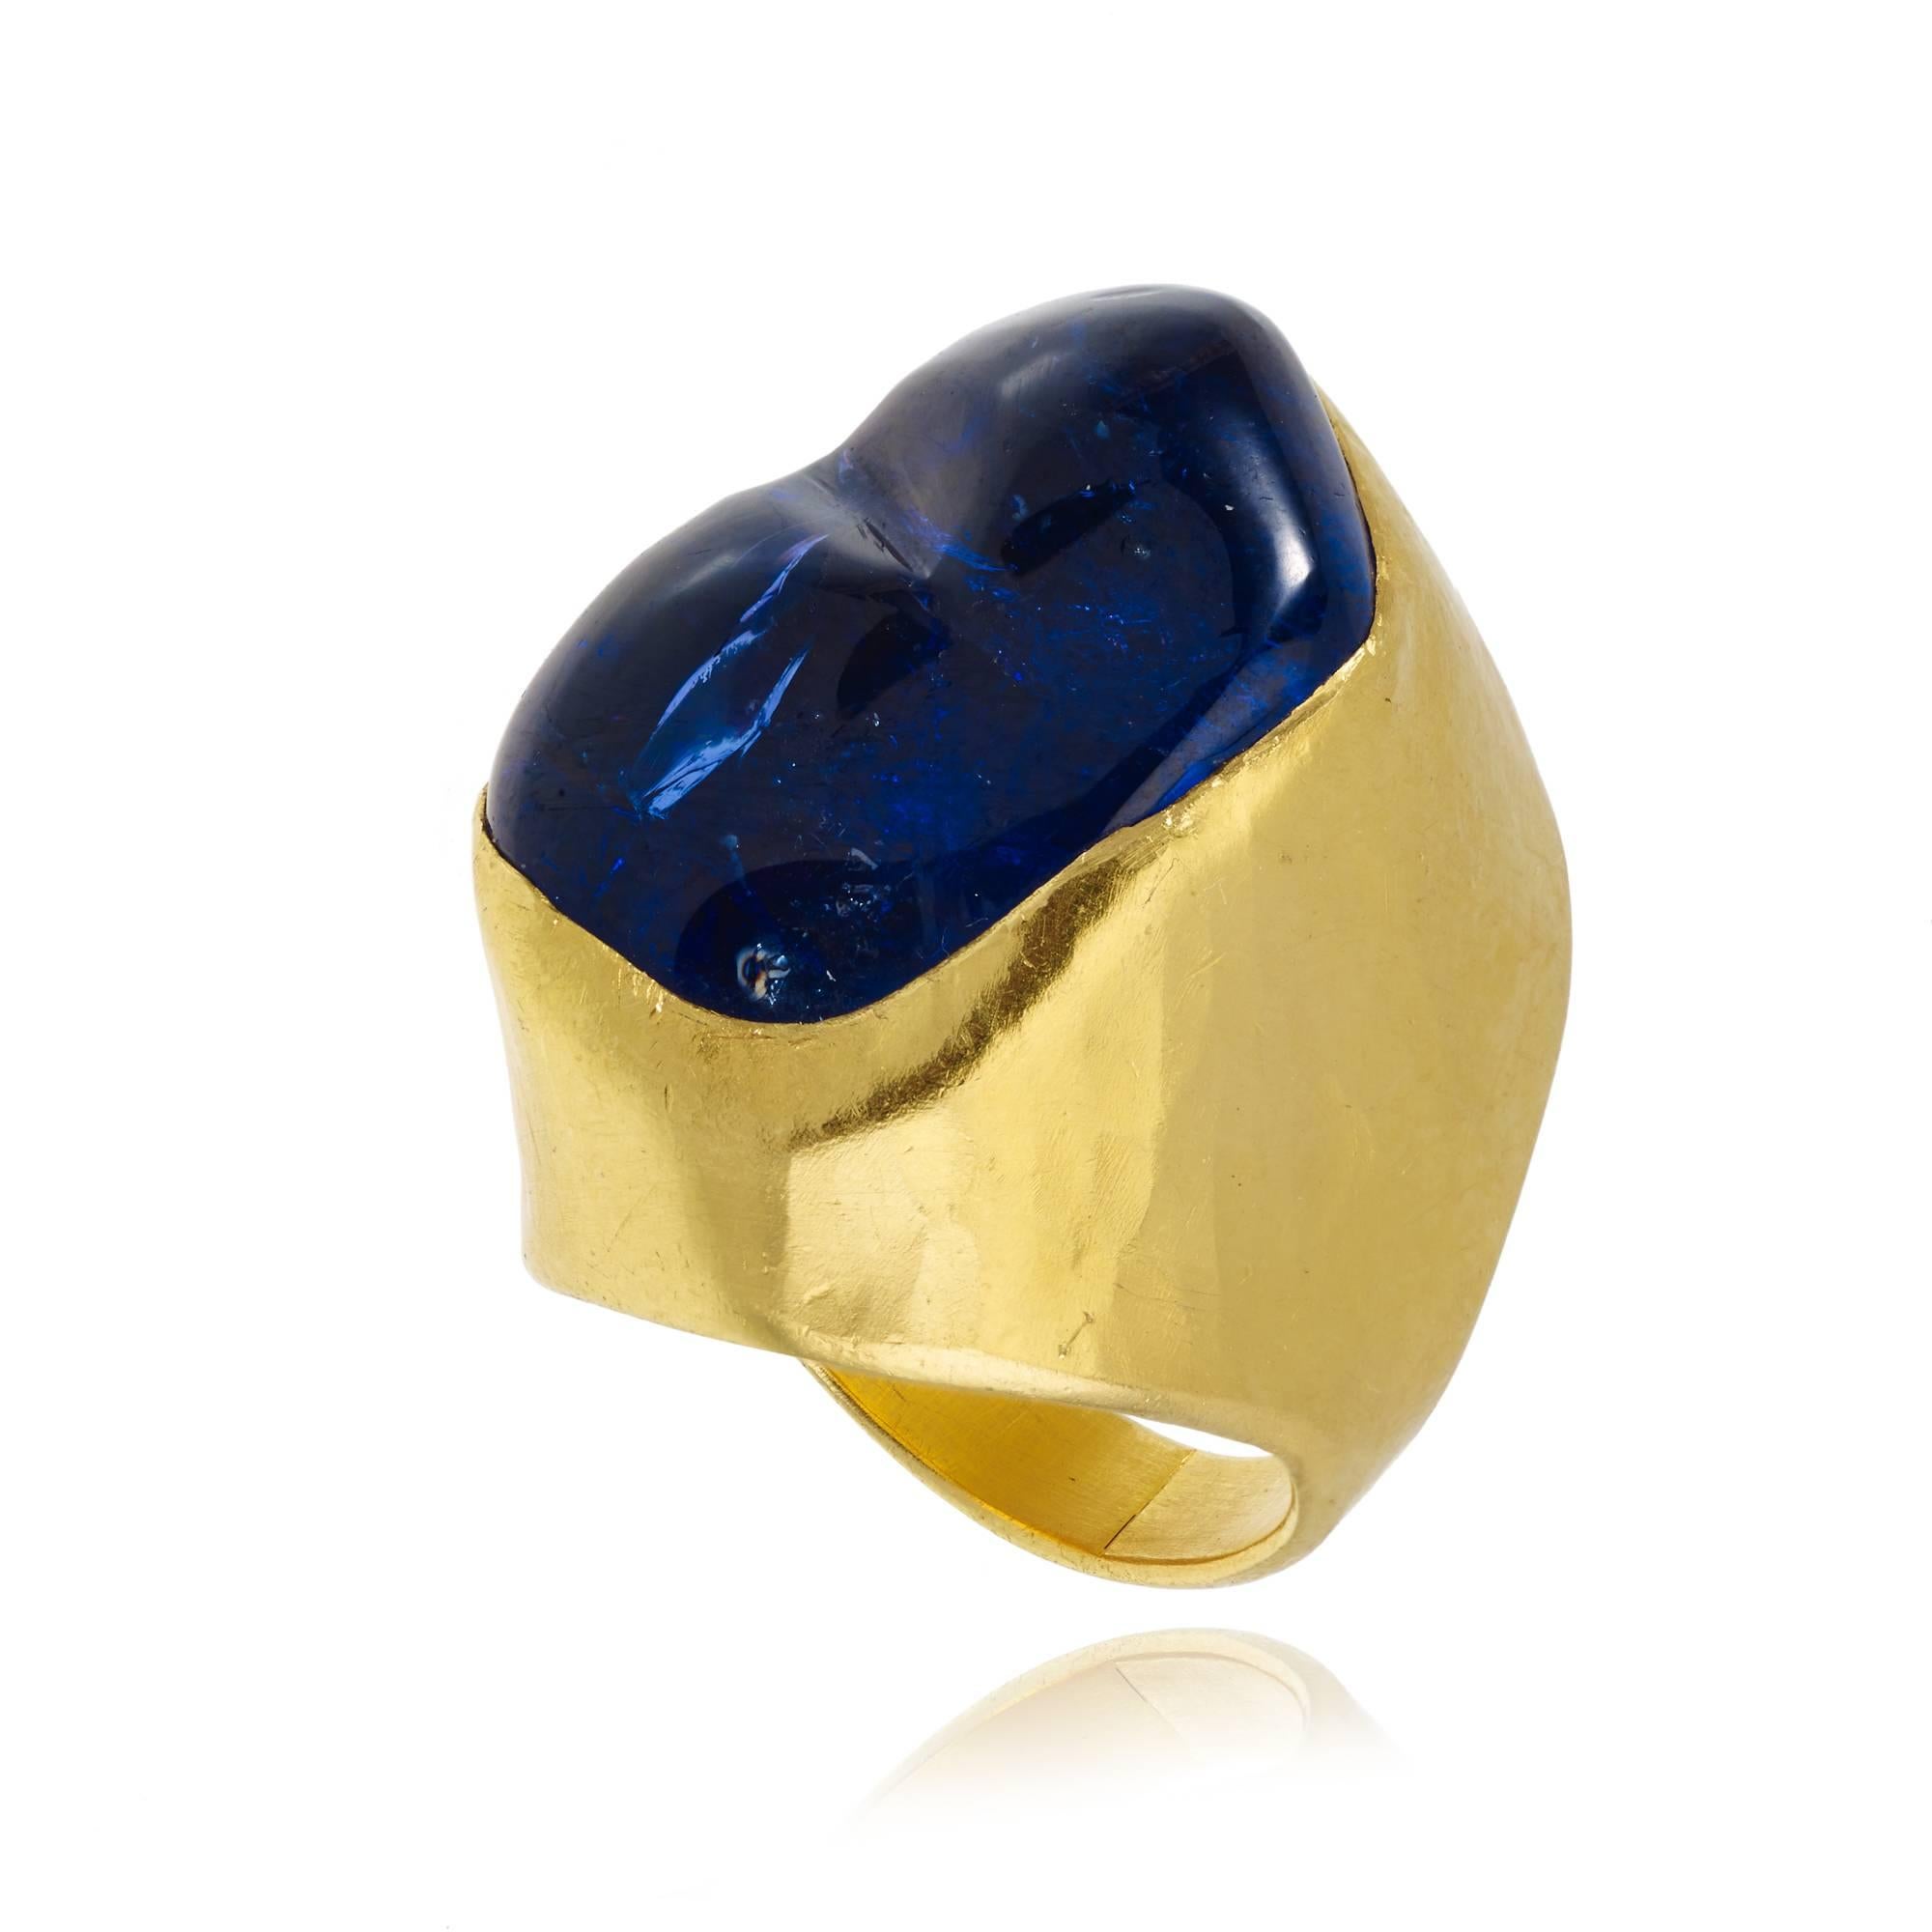 Inspired by an old Gold and Turquoise ring which Pippa bought in Tibet many years ago, the Tibetan Ring, is one of her favourites. Pippa loves to work Gold around the individual shapes of the stones, to make each piece one of a kind. This unique,